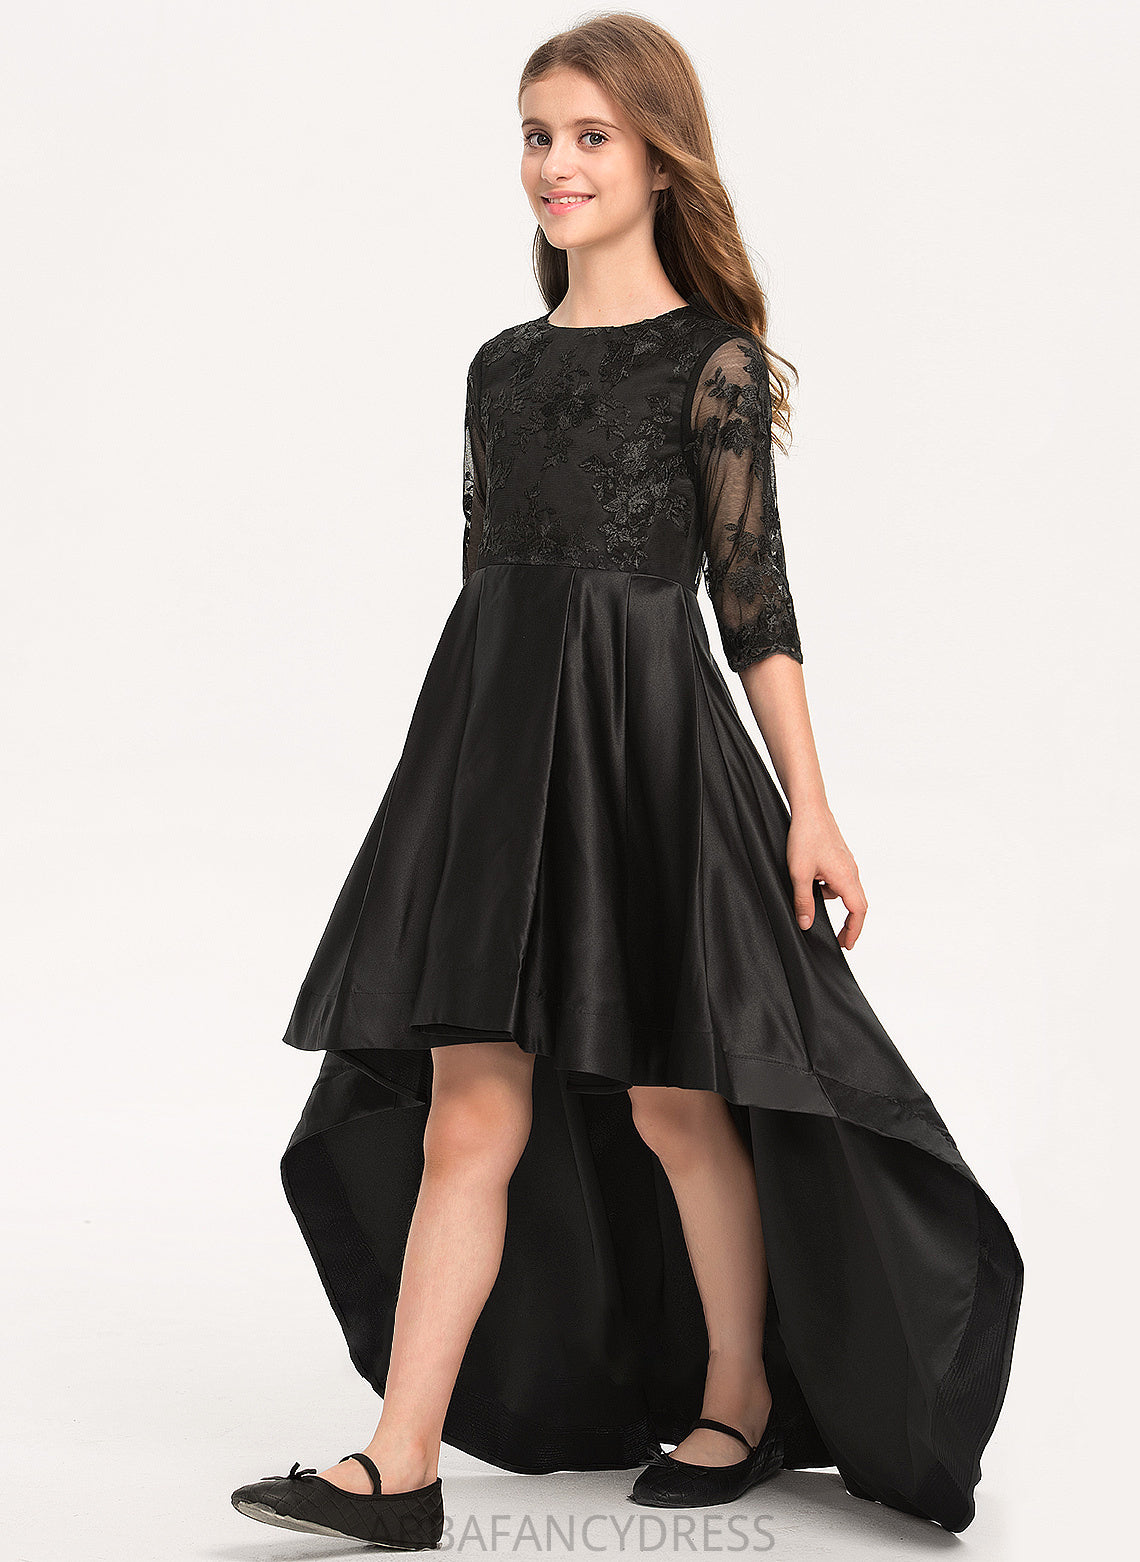 With Asymmetrical Satin A-Line Adalynn Lace Scoop Neck Junior Bridesmaid Dresses Ruffle